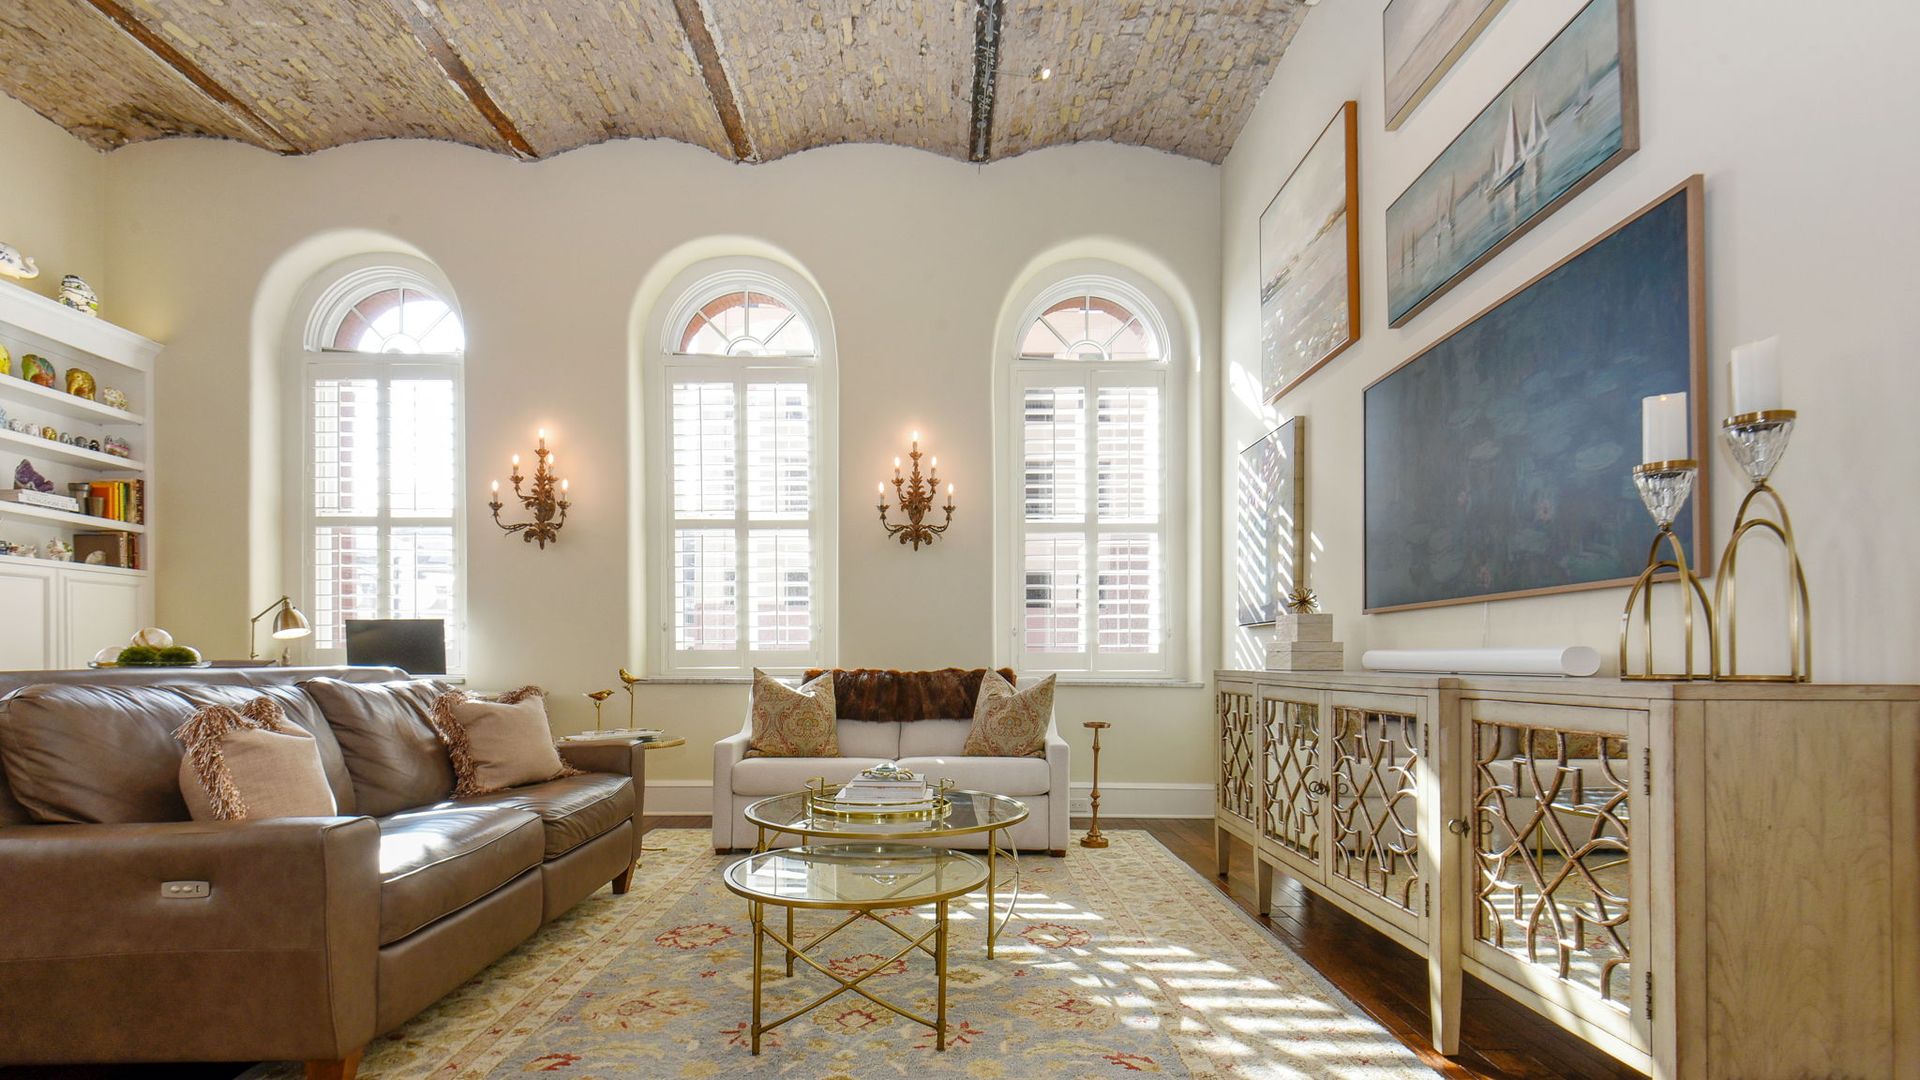 A photo of a white apartment with curved ceilings and arches windows.